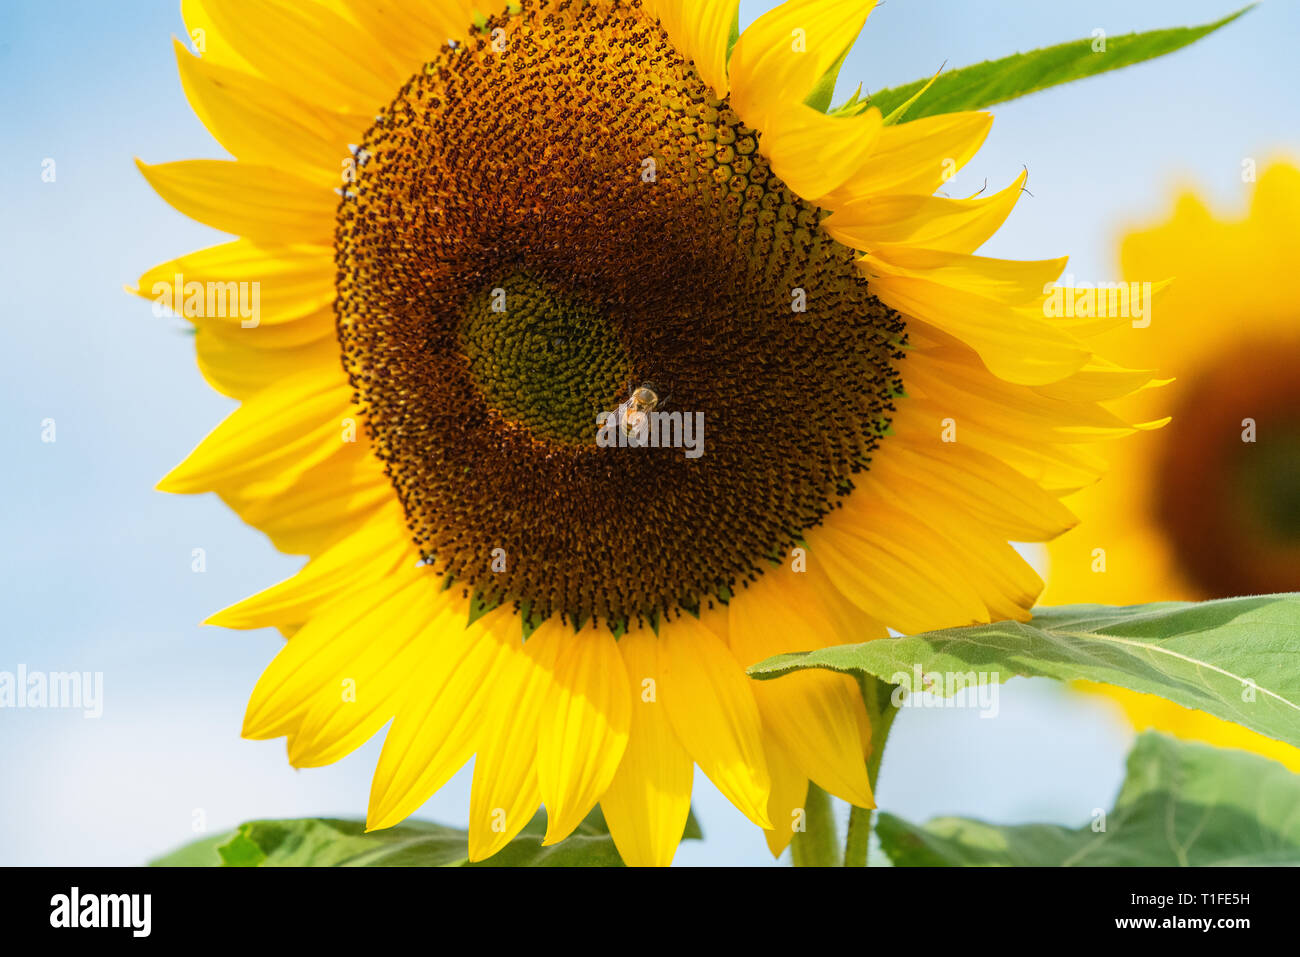 Yellow vibrant sunflower and honey bee with bright blue sky background with bees pollinating the flower. Stock Photo